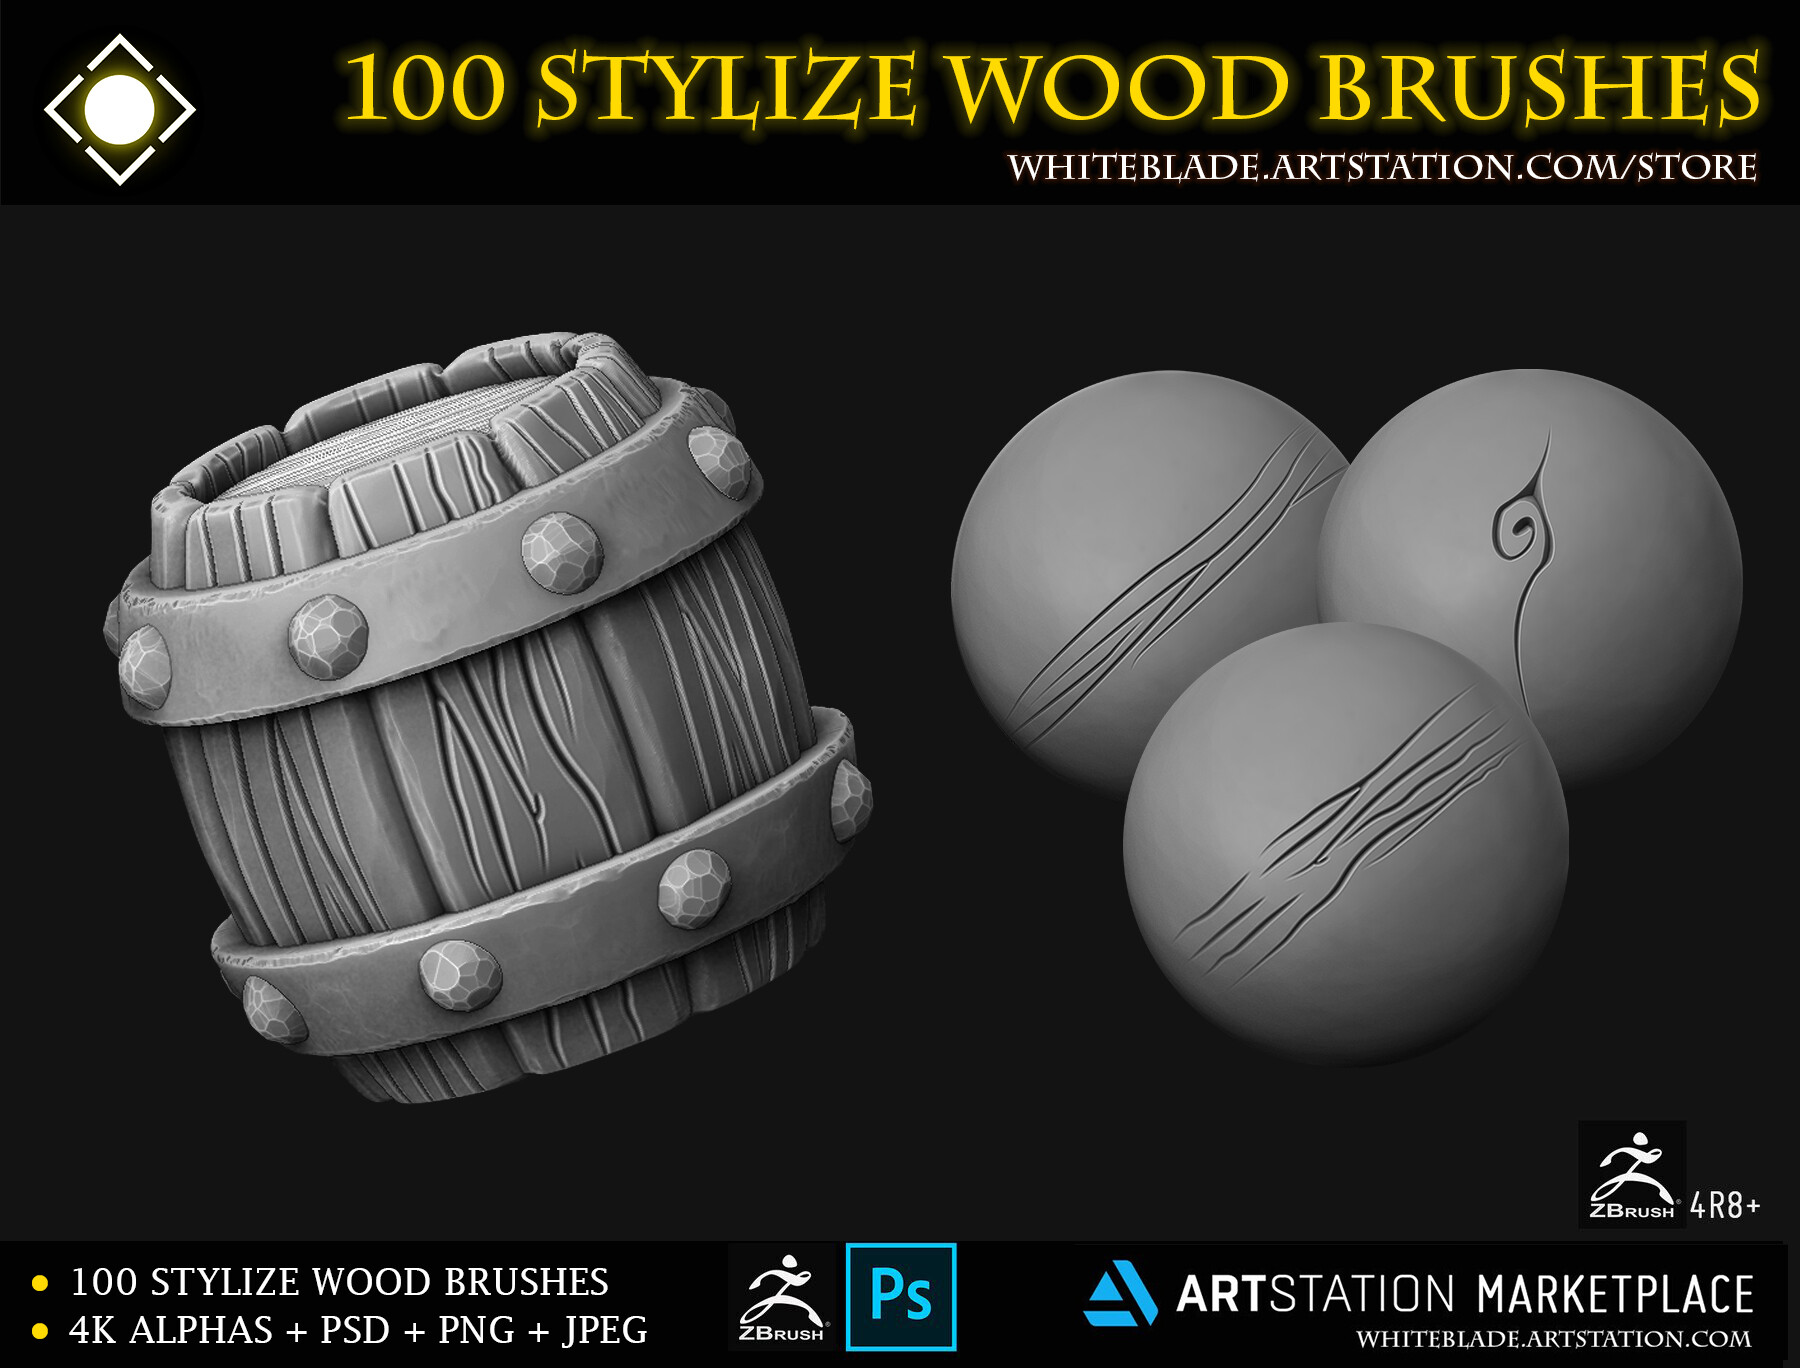 zbrush 4r8 brushes in 2019